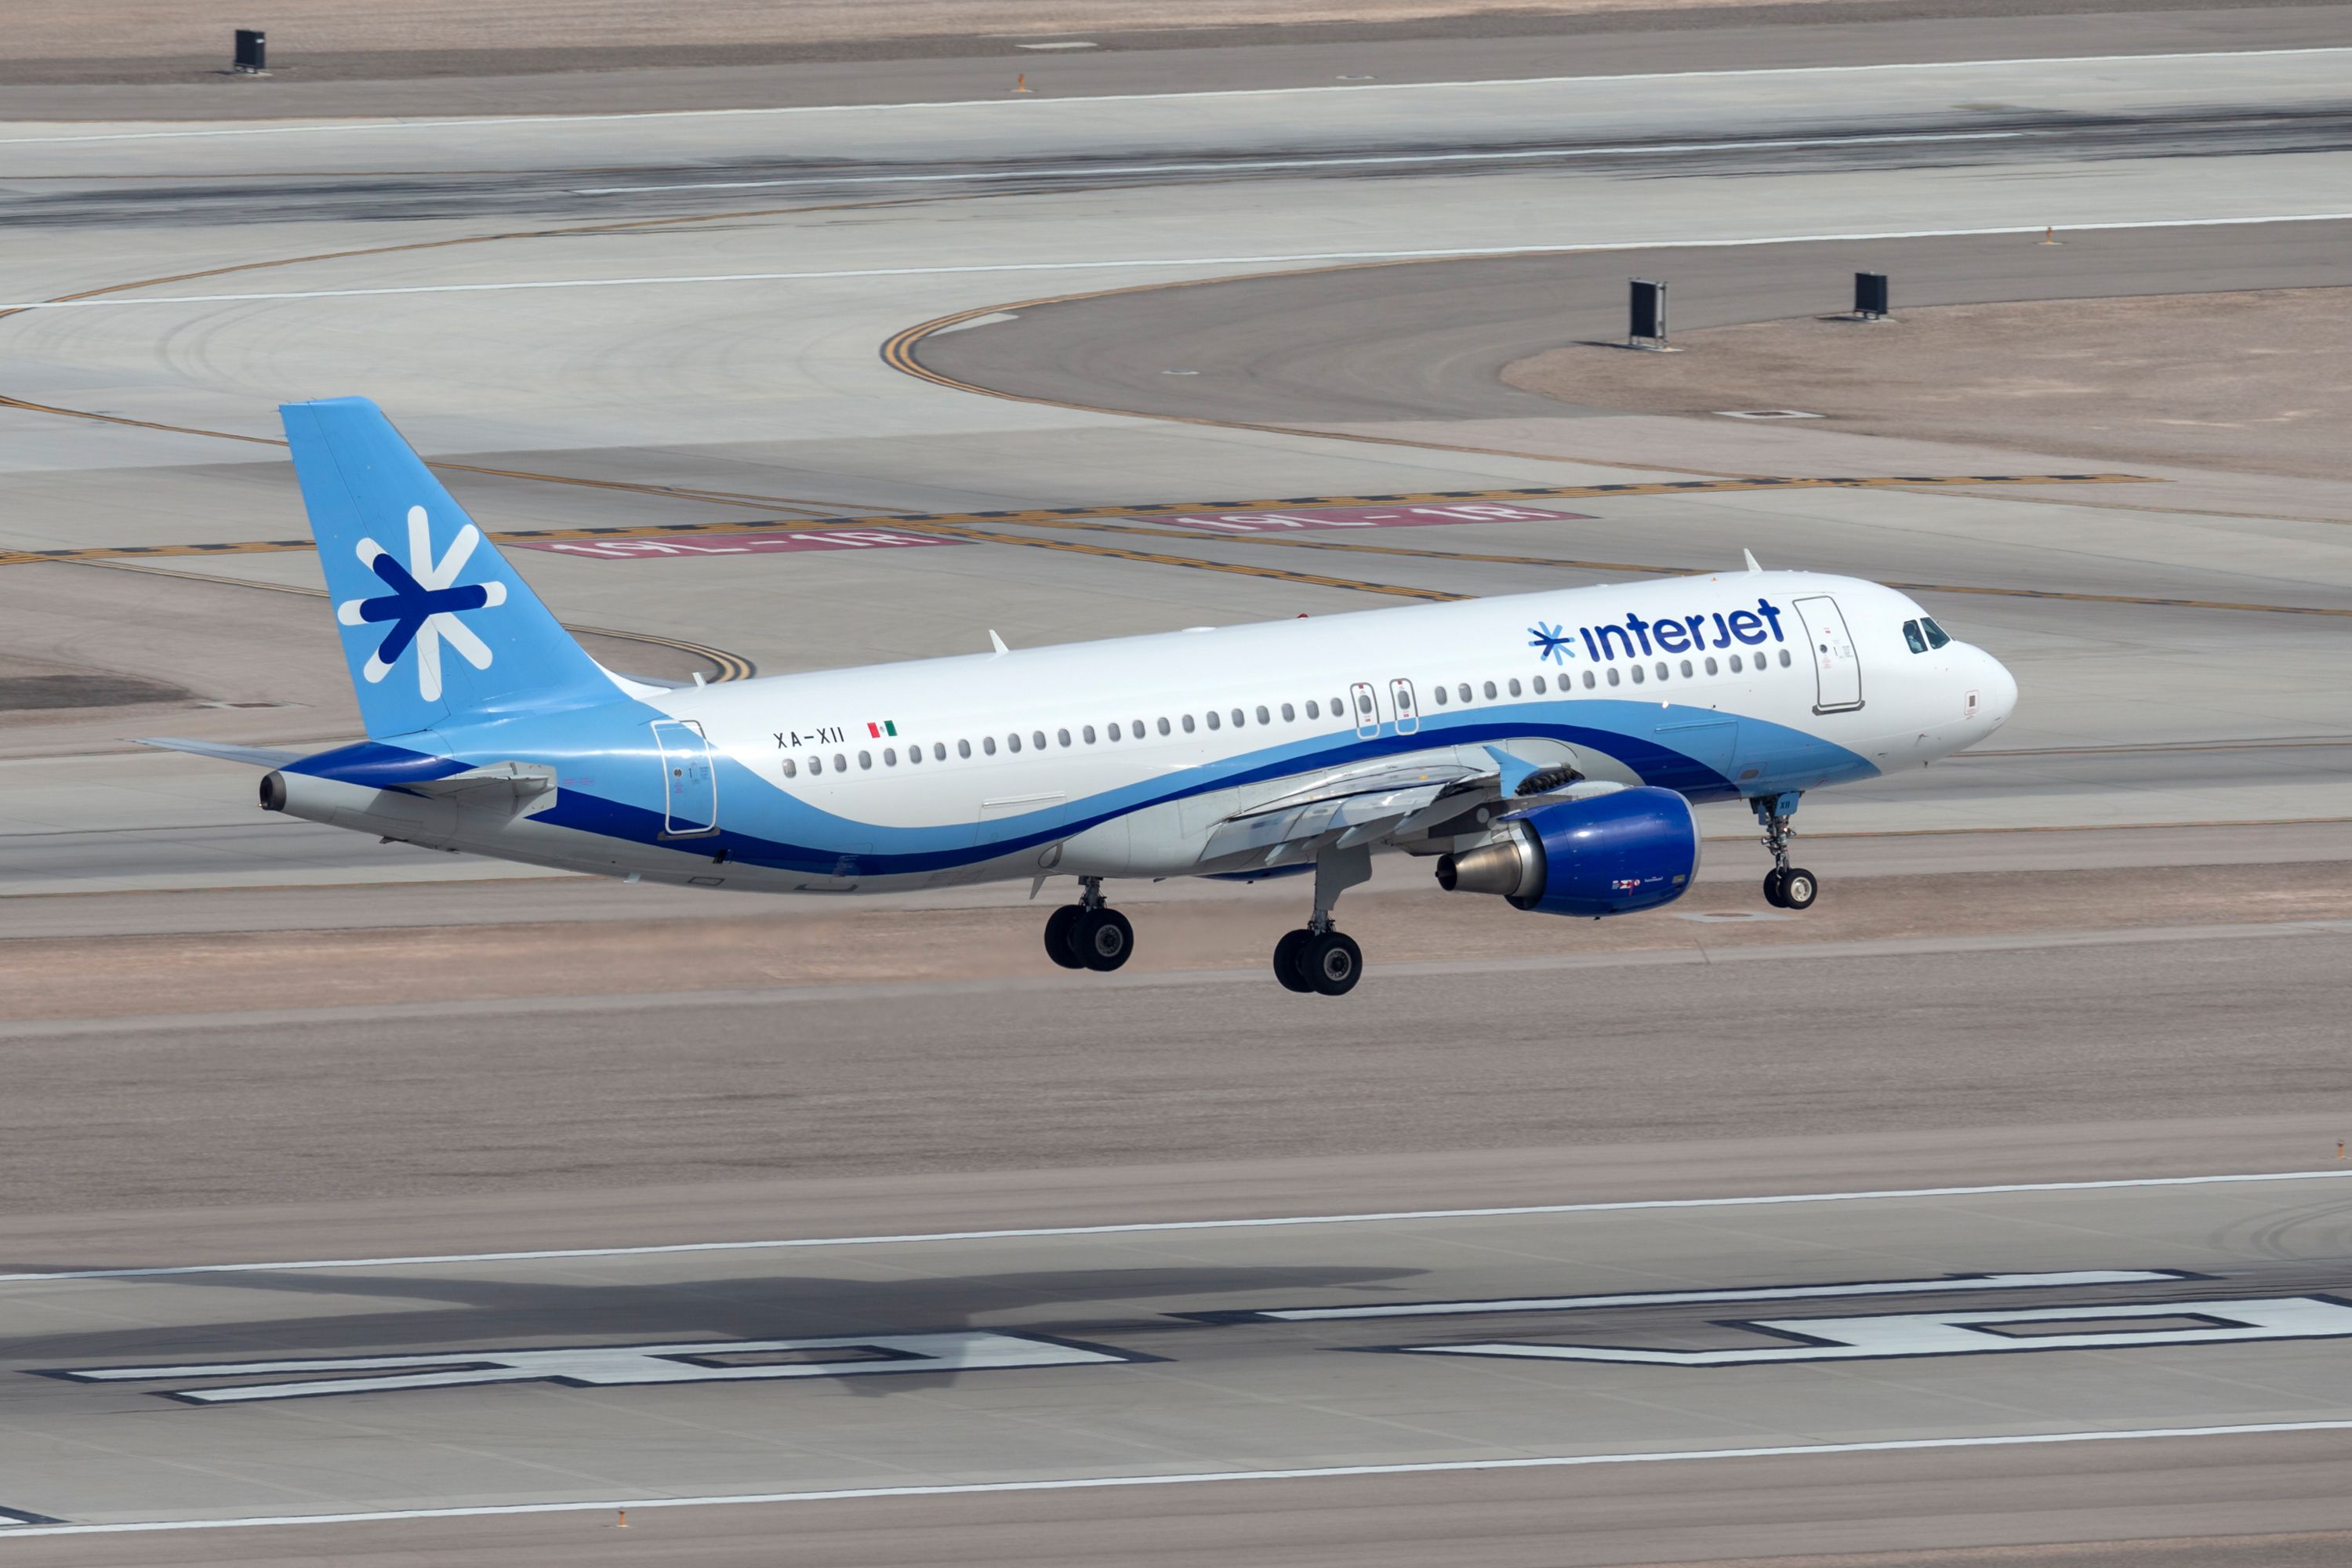 An Interjet aircraft about to land in Las Vegas.